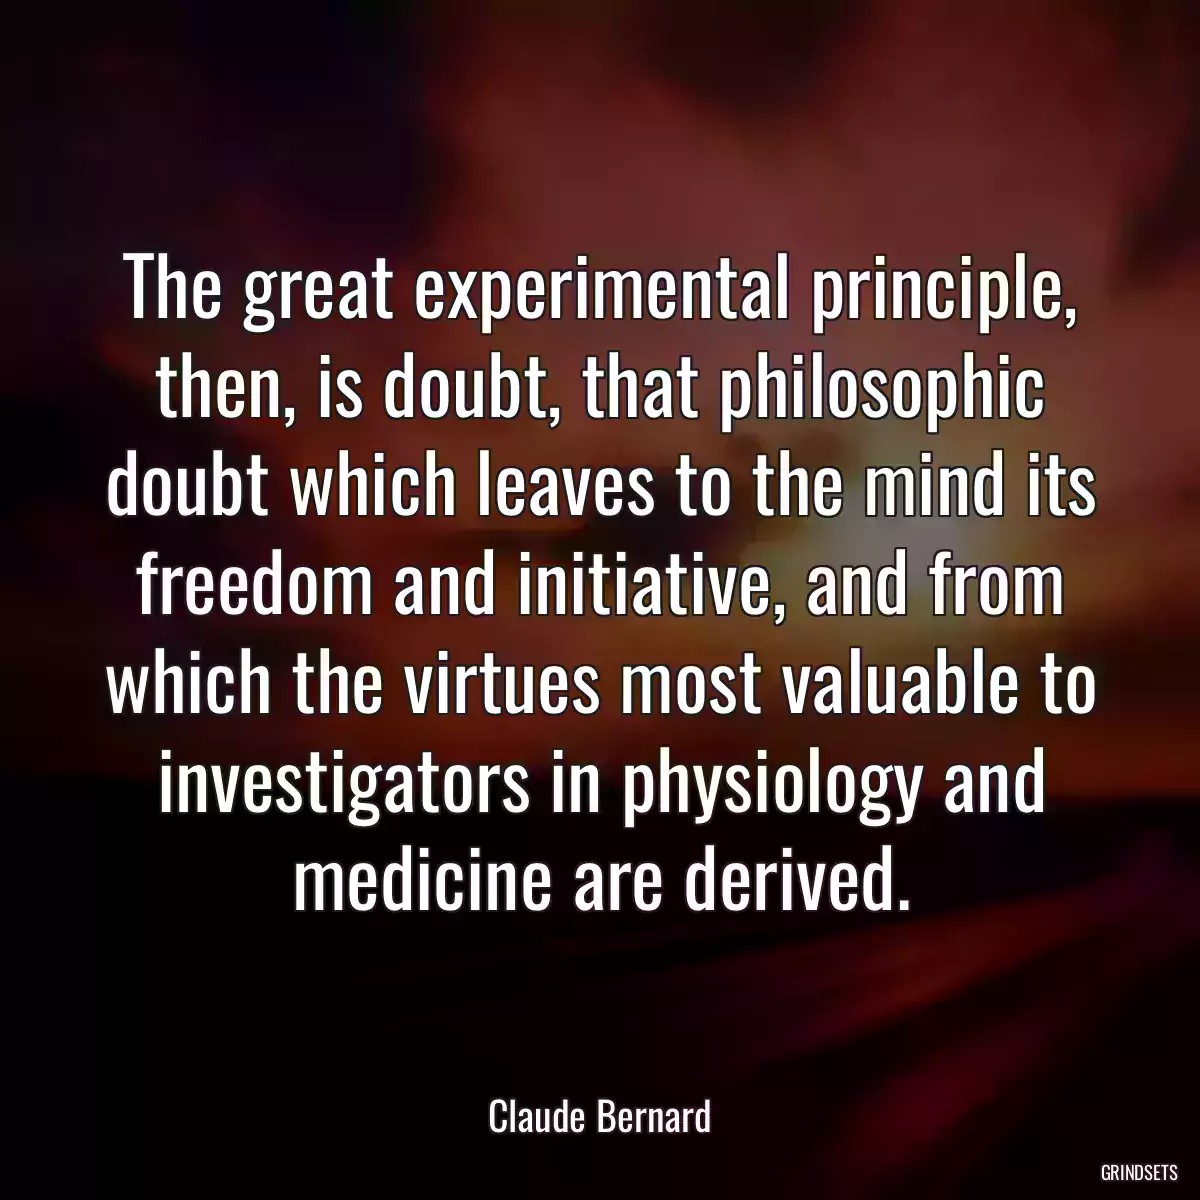 The great experimental principle, then, is doubt, that philosophic doubt which leaves to the mind its freedom and initiative, and from which the virtues most valuable to investigators in physiology and medicine are derived.